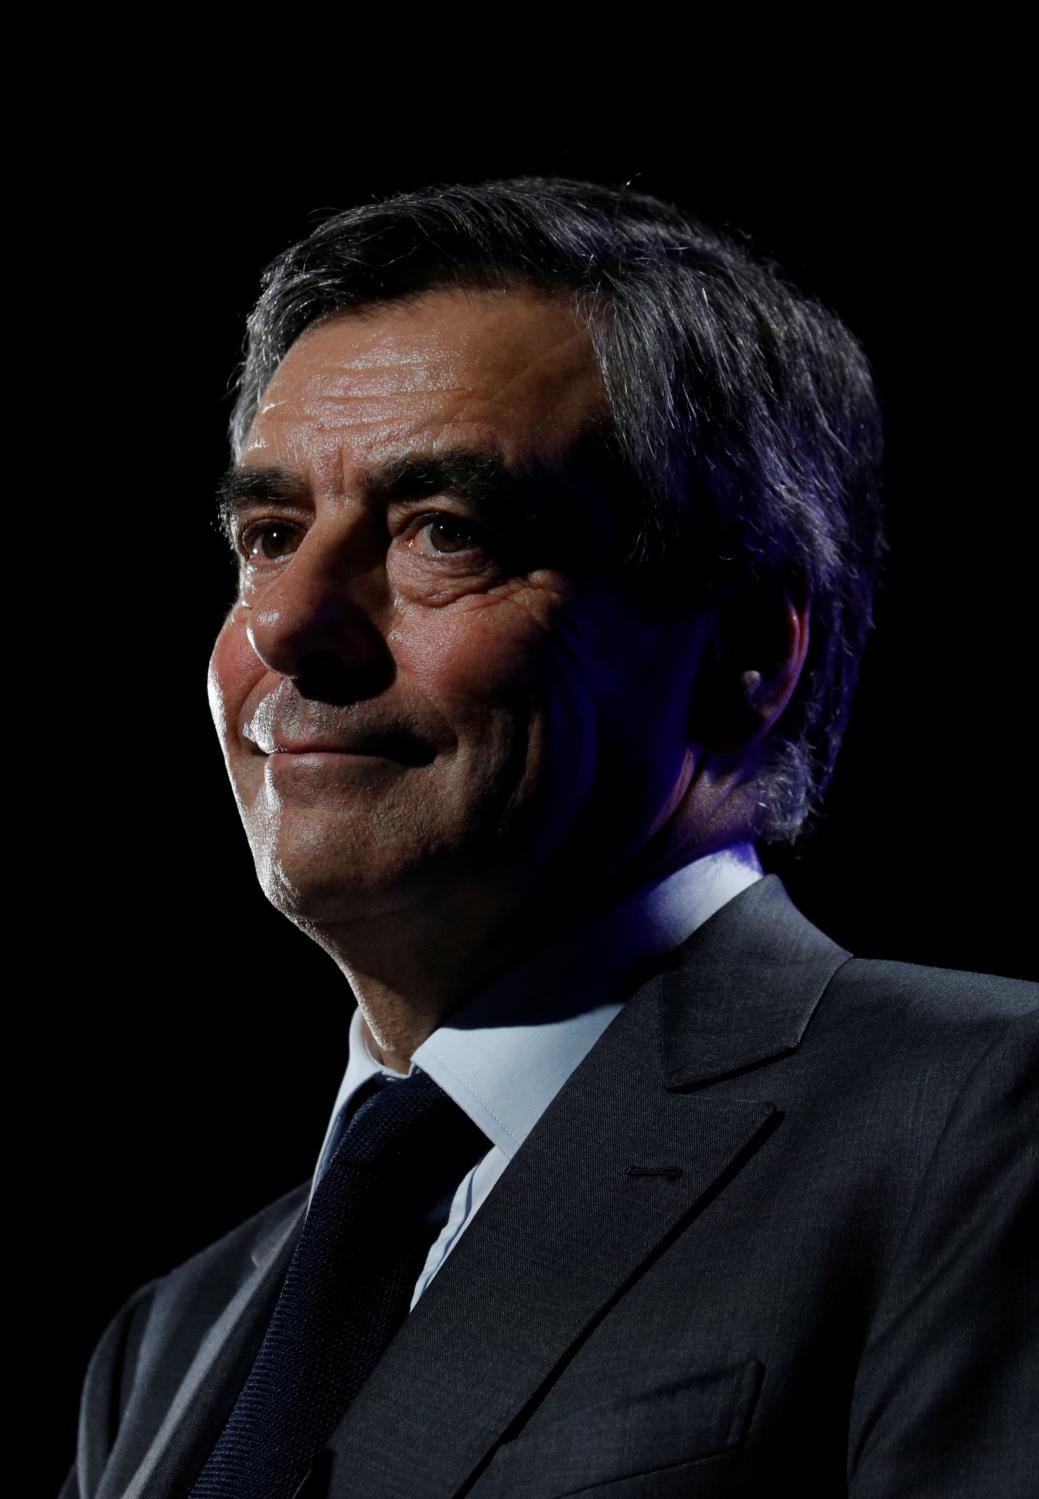 Francois Fillon, former French Prime Minister, member of the Republicans political party and 2017 presidential election candidate of the French centre-right delivers a speech at a campaign rally in Caen, France March 16, 2017. REUTERS/Philippe Wojazer - RTX31DF4